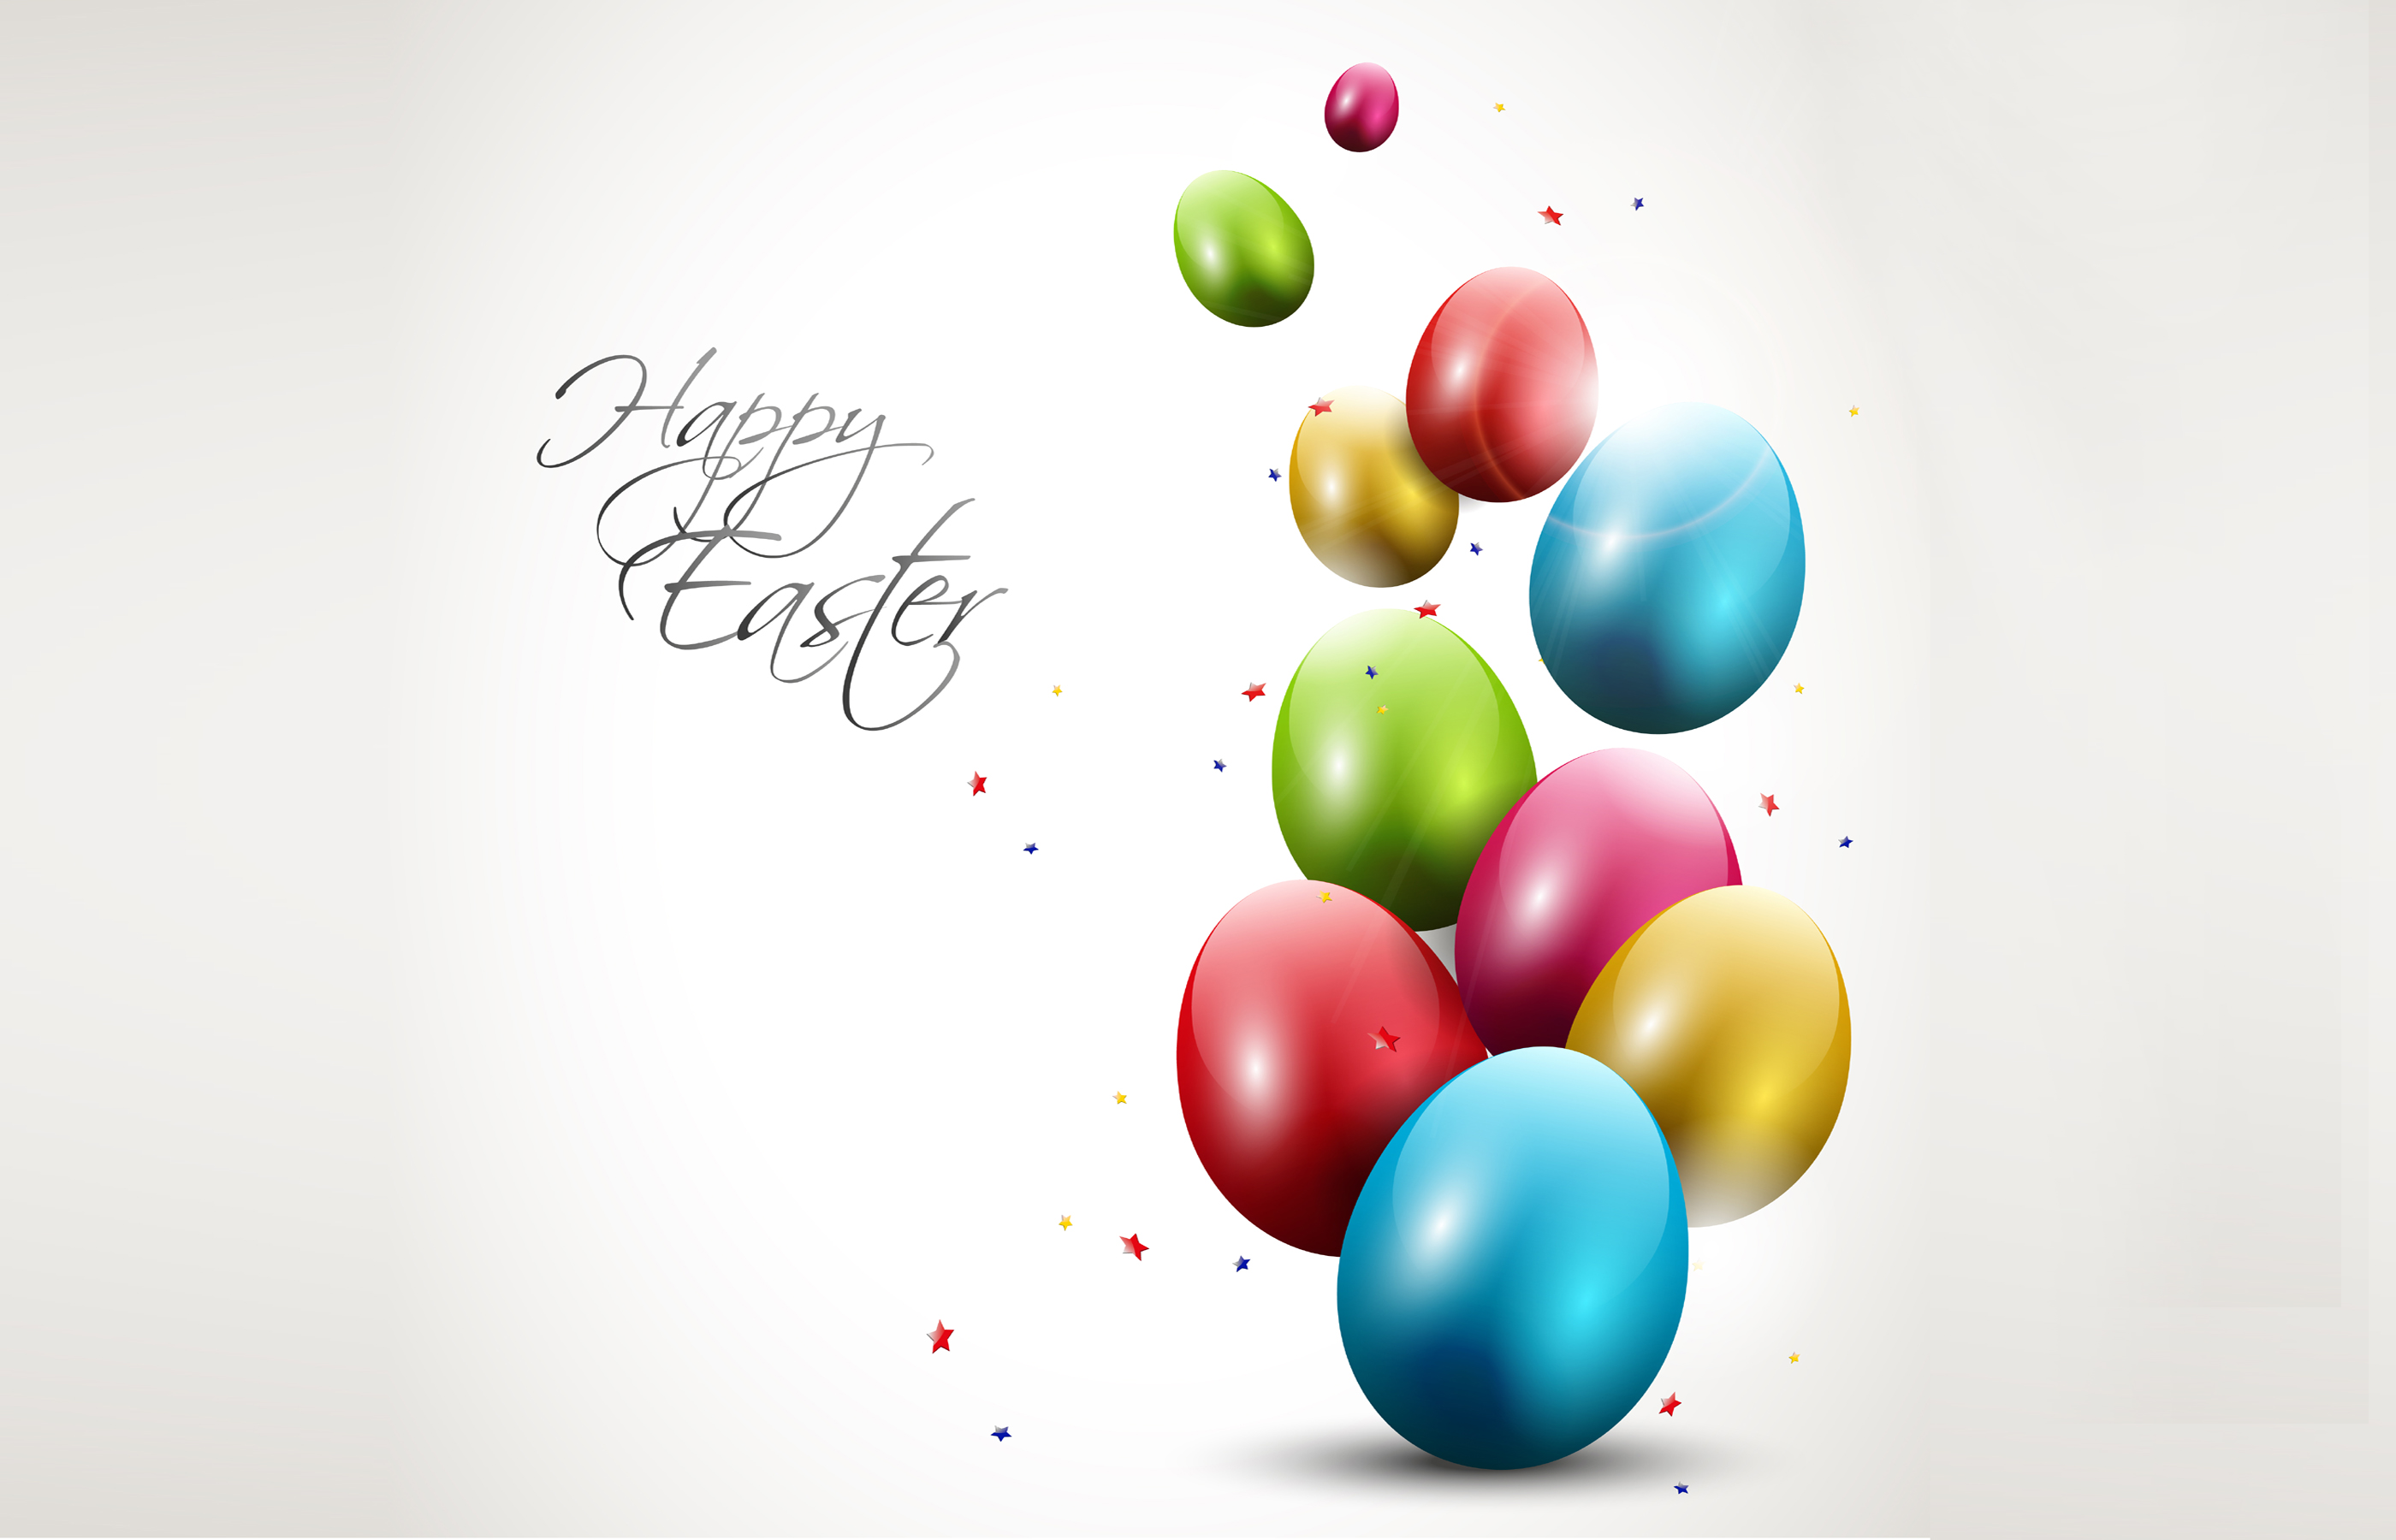 Happy Easter Images for Desktop collection